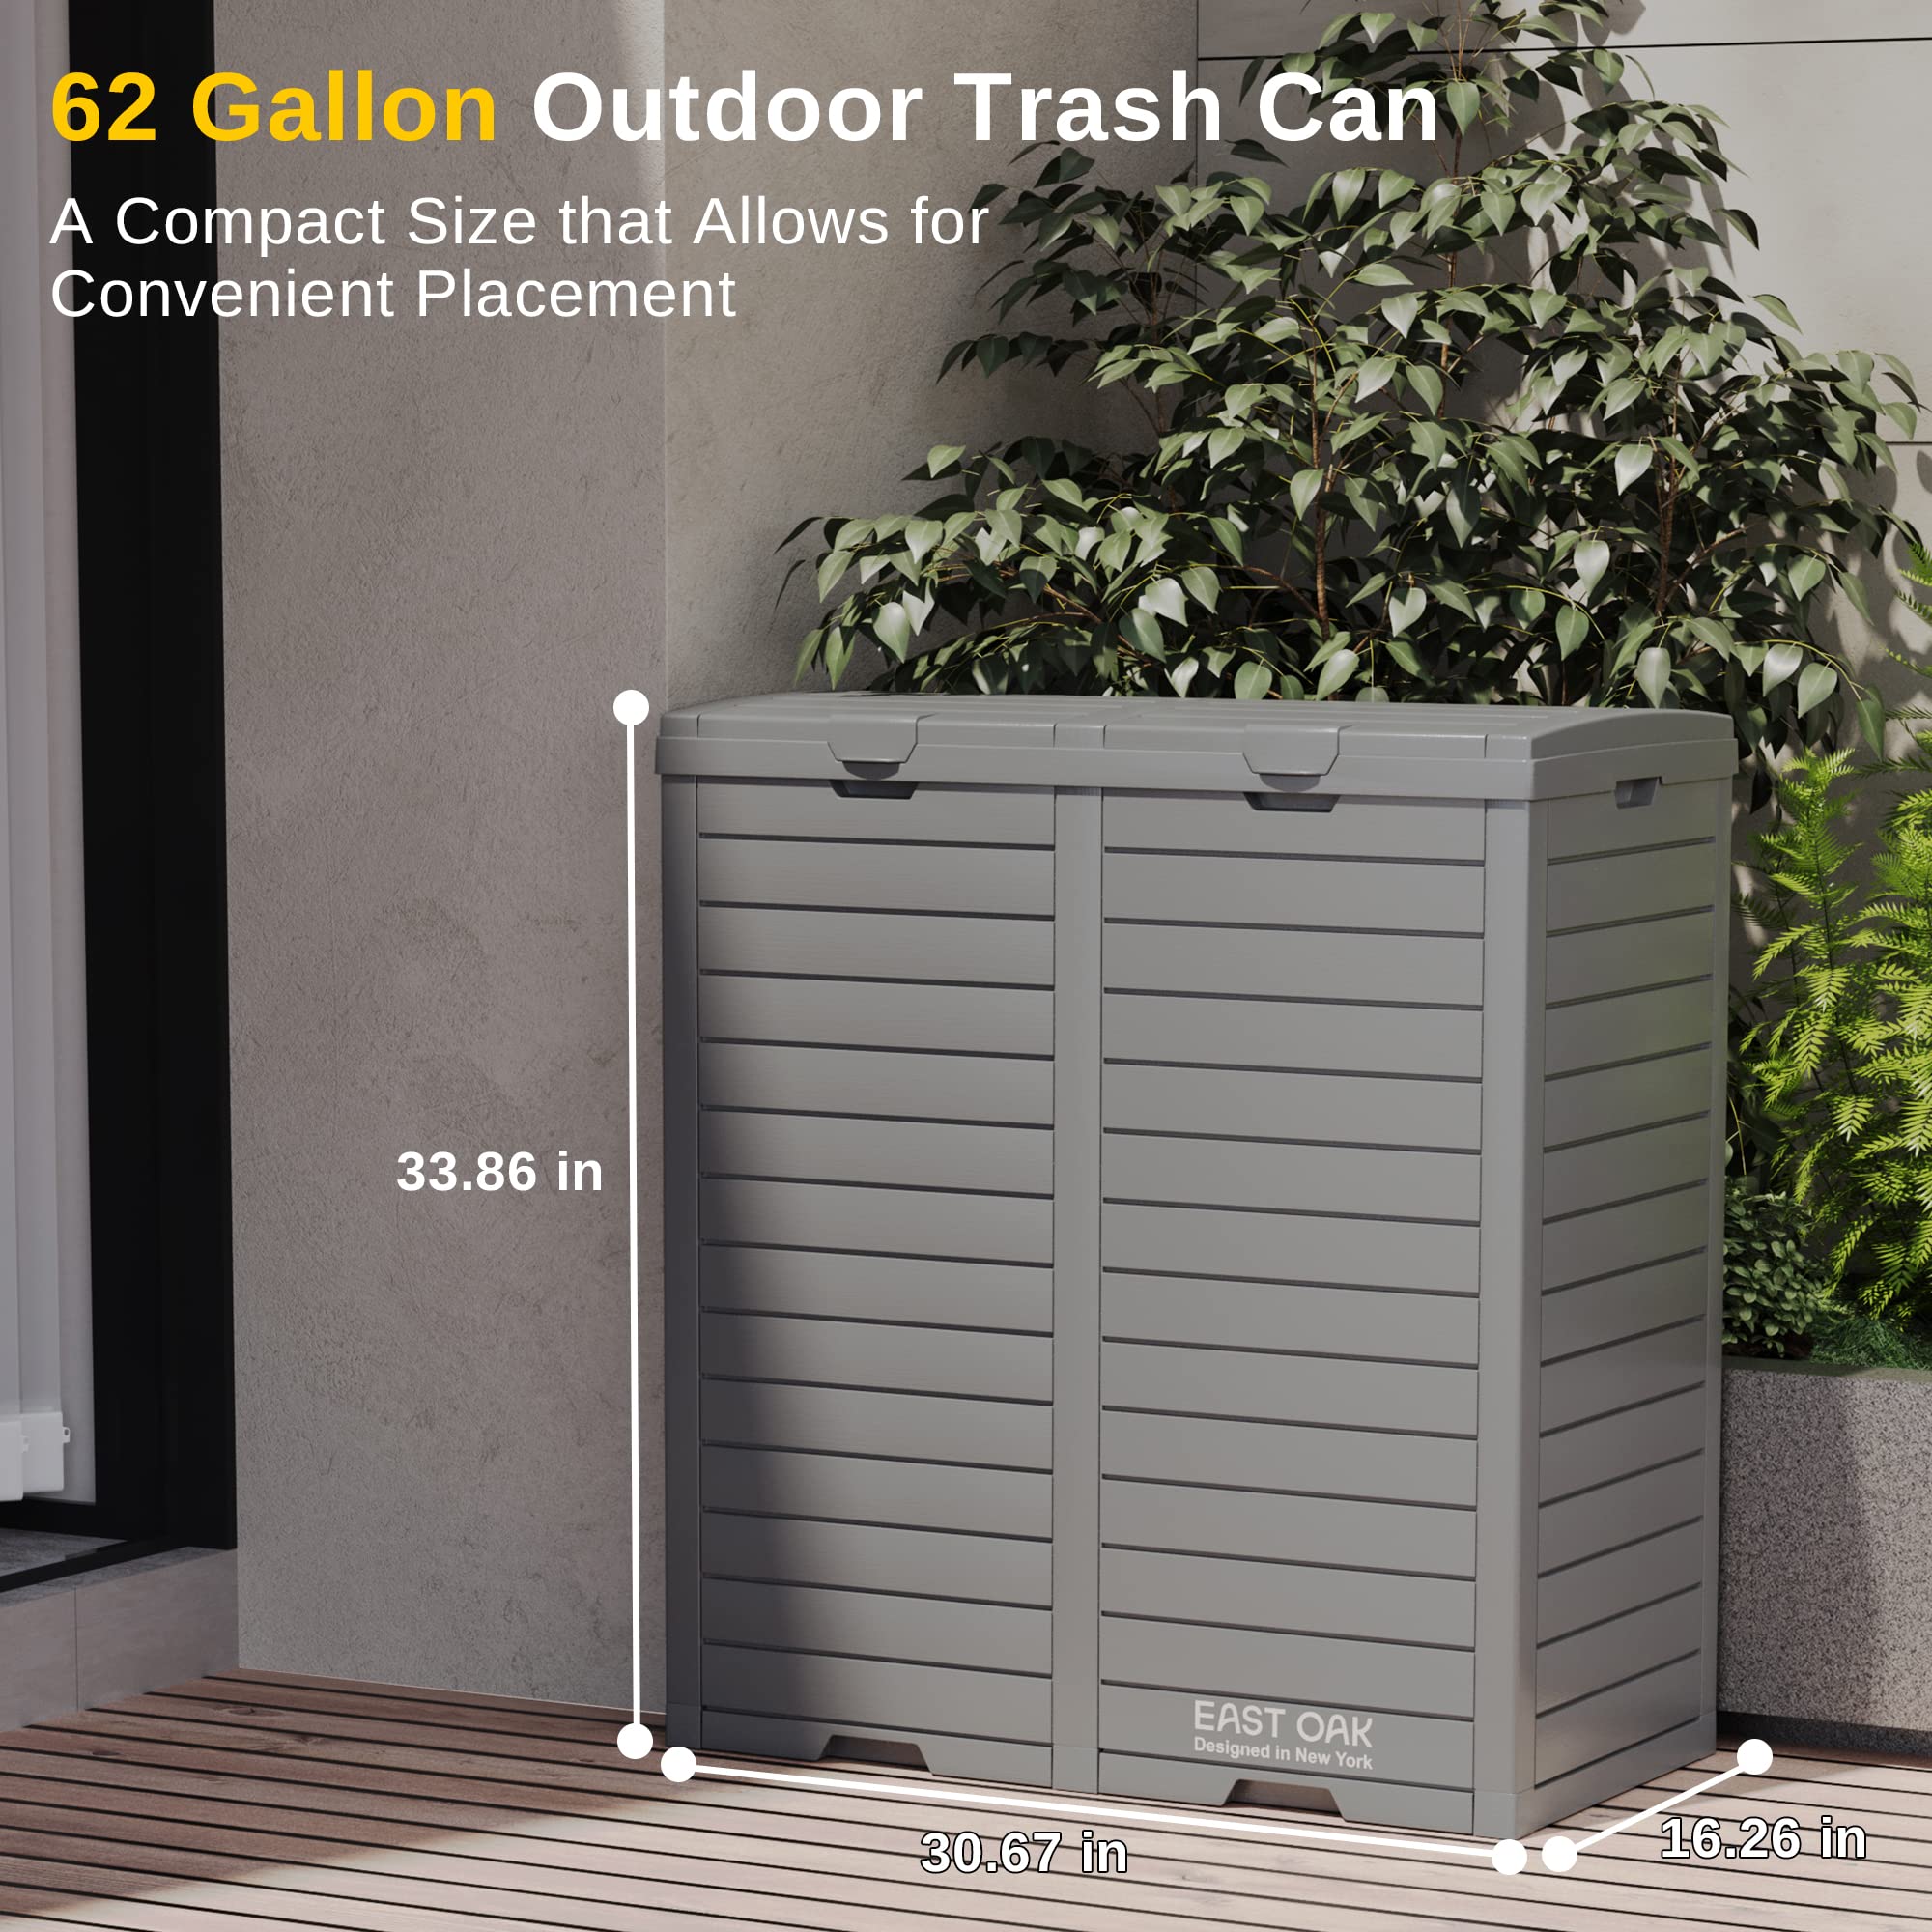 EAST OAK 62 Gallon Outdoor Trash Can, Waterproof Resin Garbage Can with Tiered Lid and Drip Tray, Outside Trash Bin for Patio, Backyard, Deck, Grey